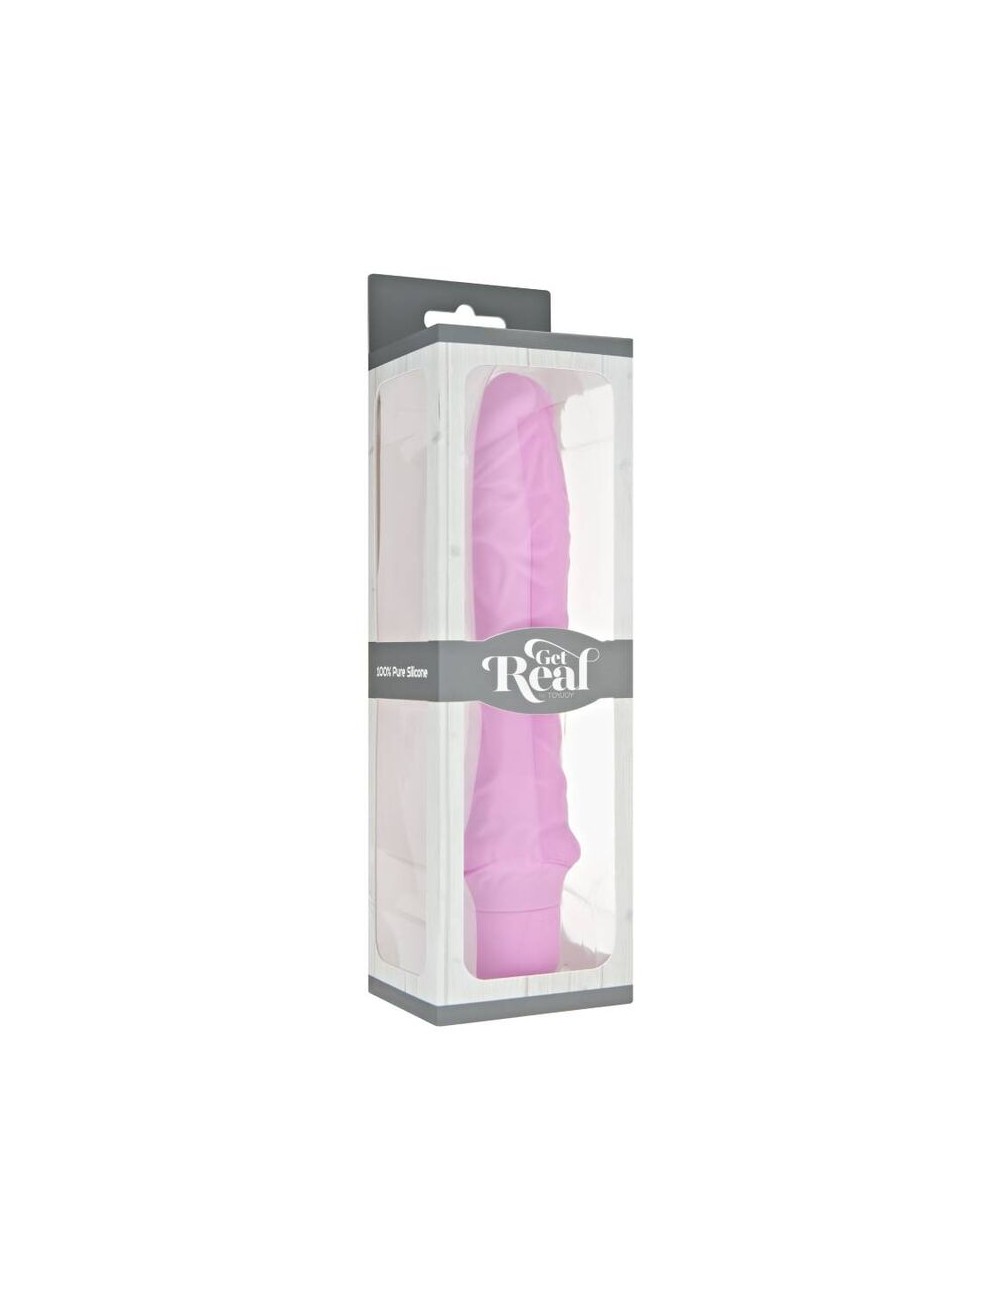 GET REAL - CLASSIC LARGE PINK VIBRATOR